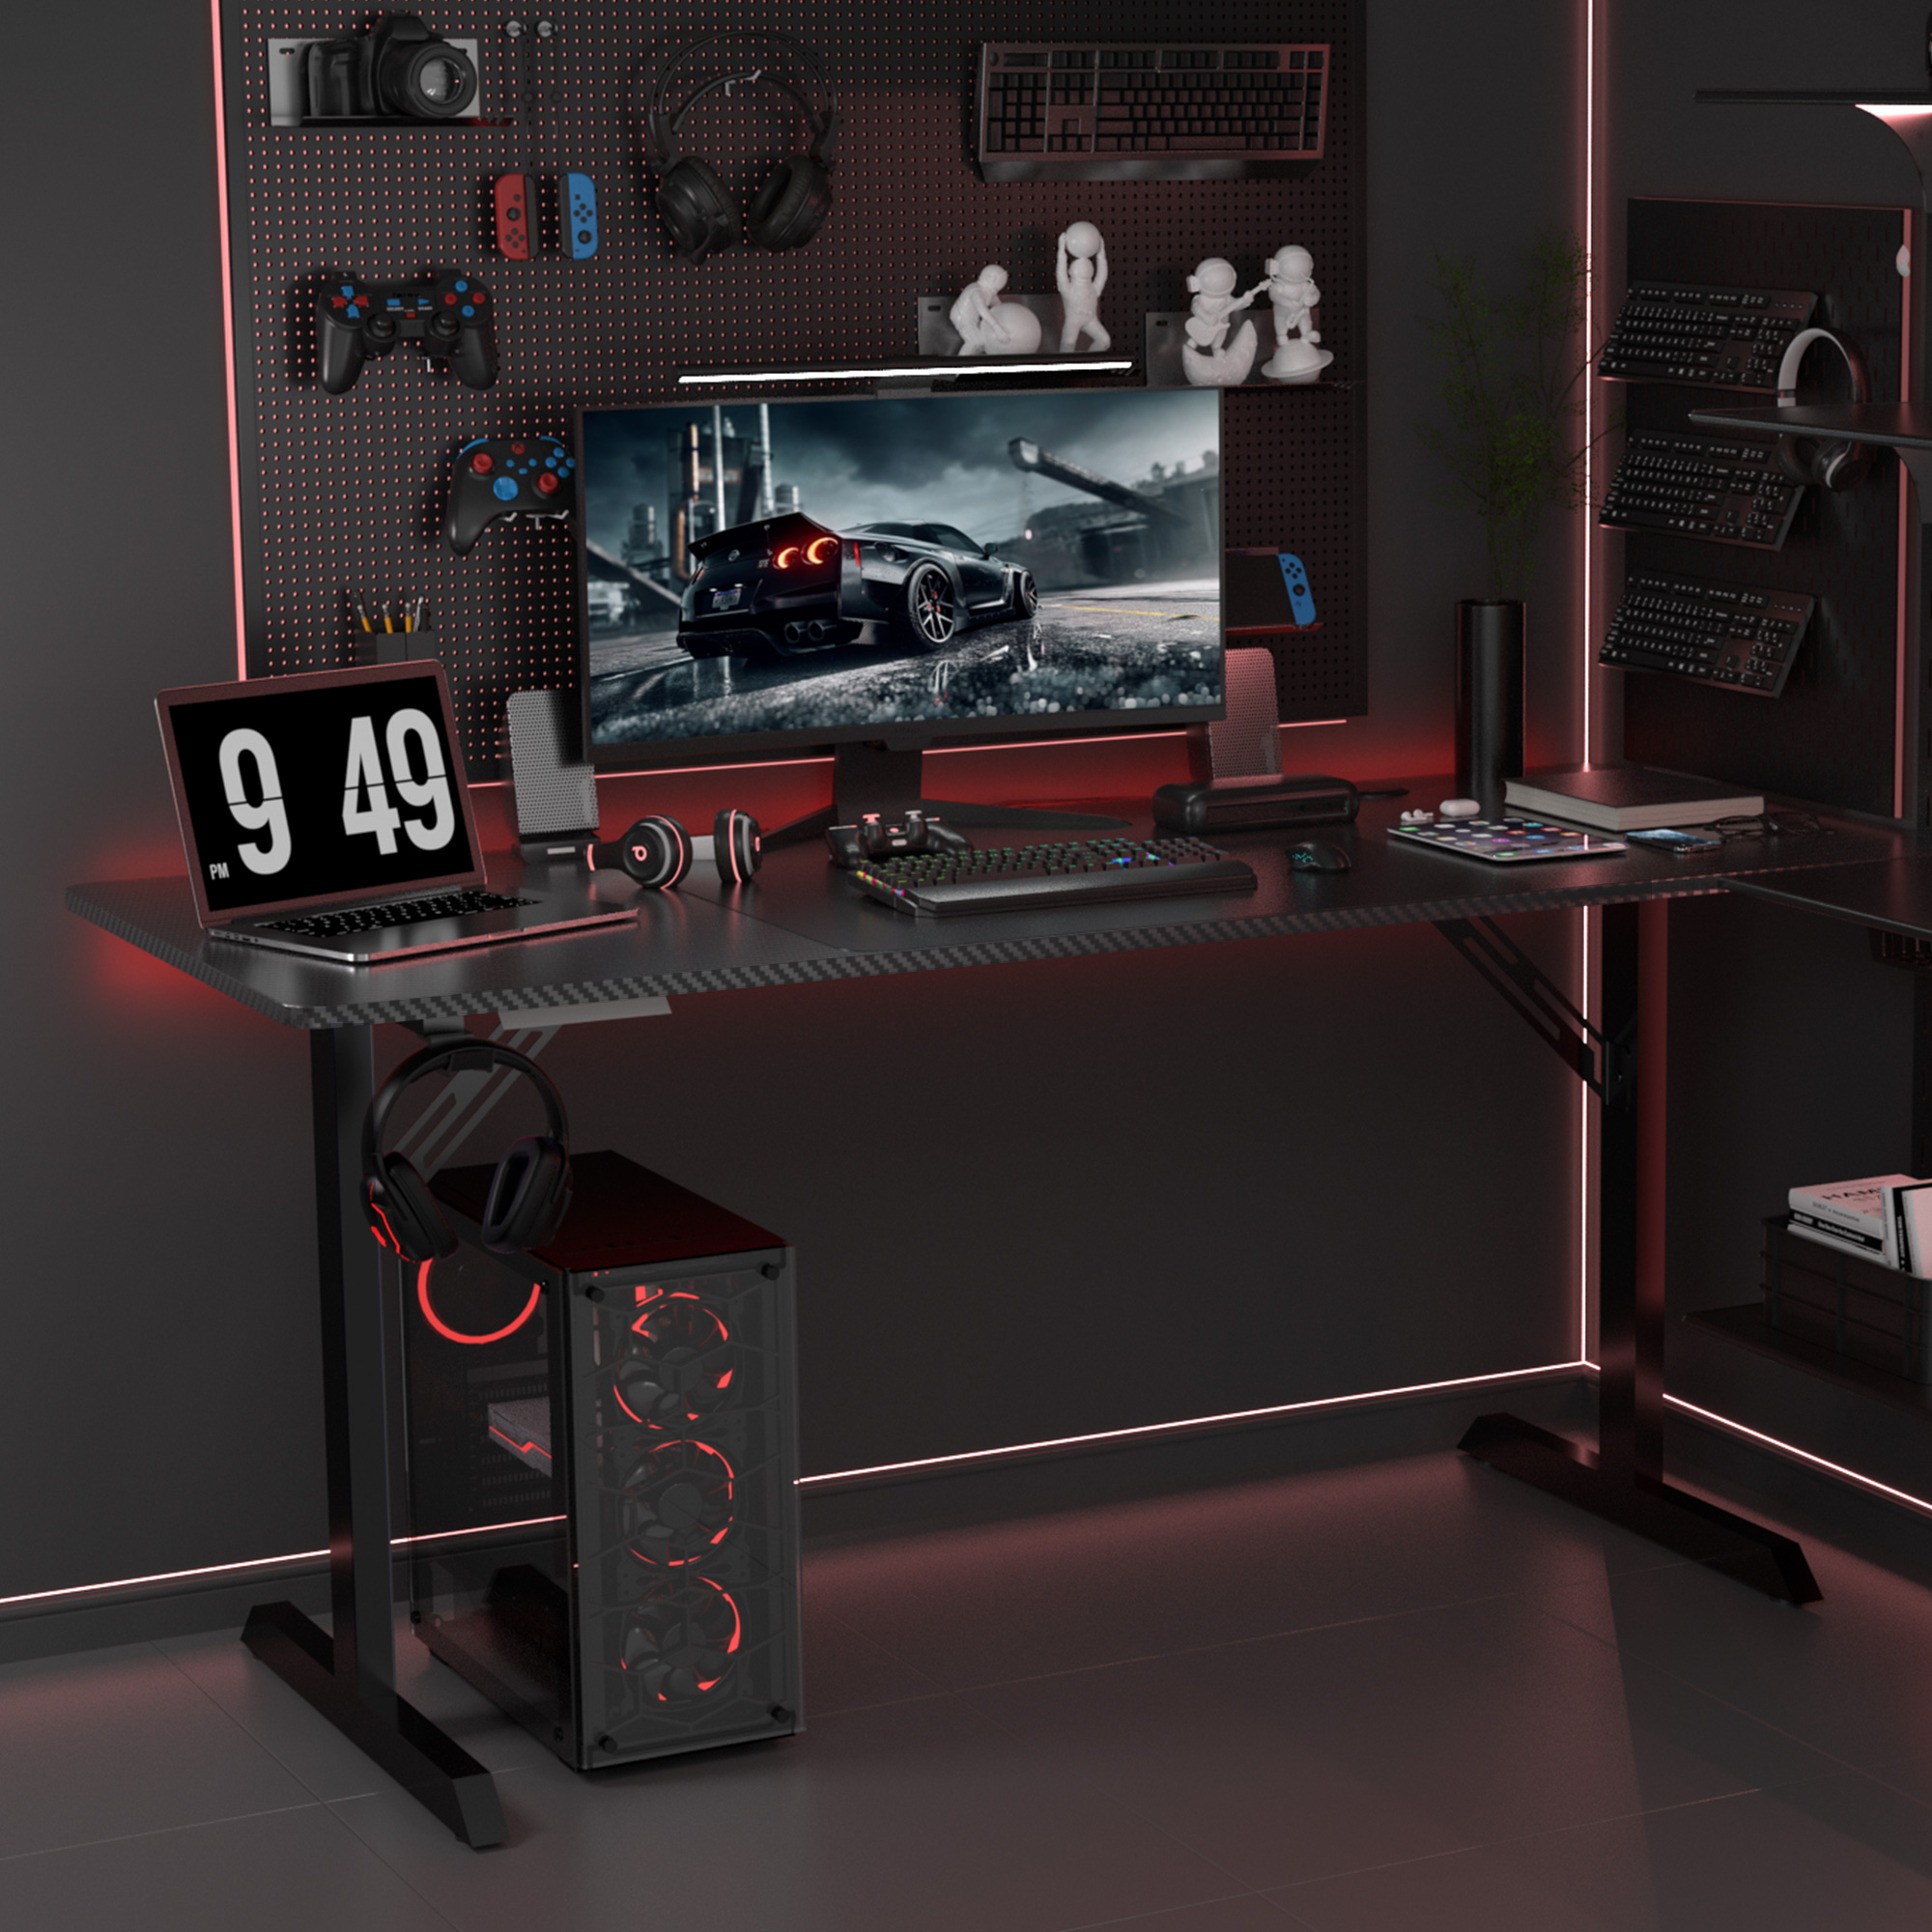 GTRACING 55" Large RGB Gaming Desk with Mouse Pad T-Shaped Office Desk Spacious Work Surface Table, Black - image 5 of 10